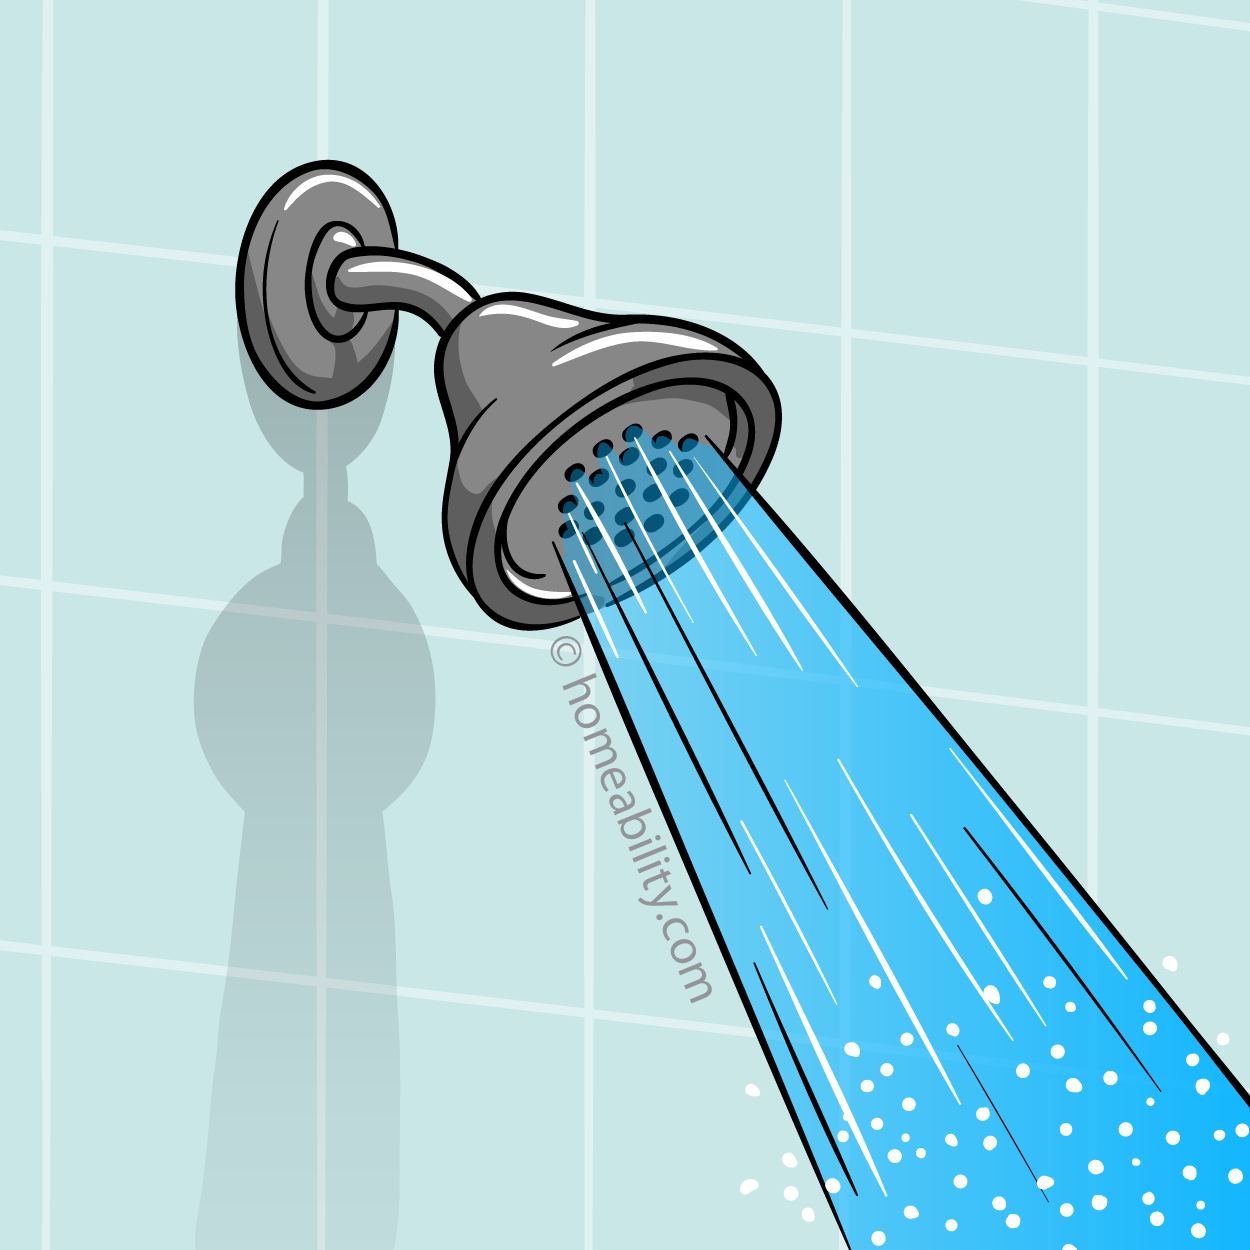 https://homeability.com/main/wp-content/uploads/2015/12/shower-head-homeability-03.png